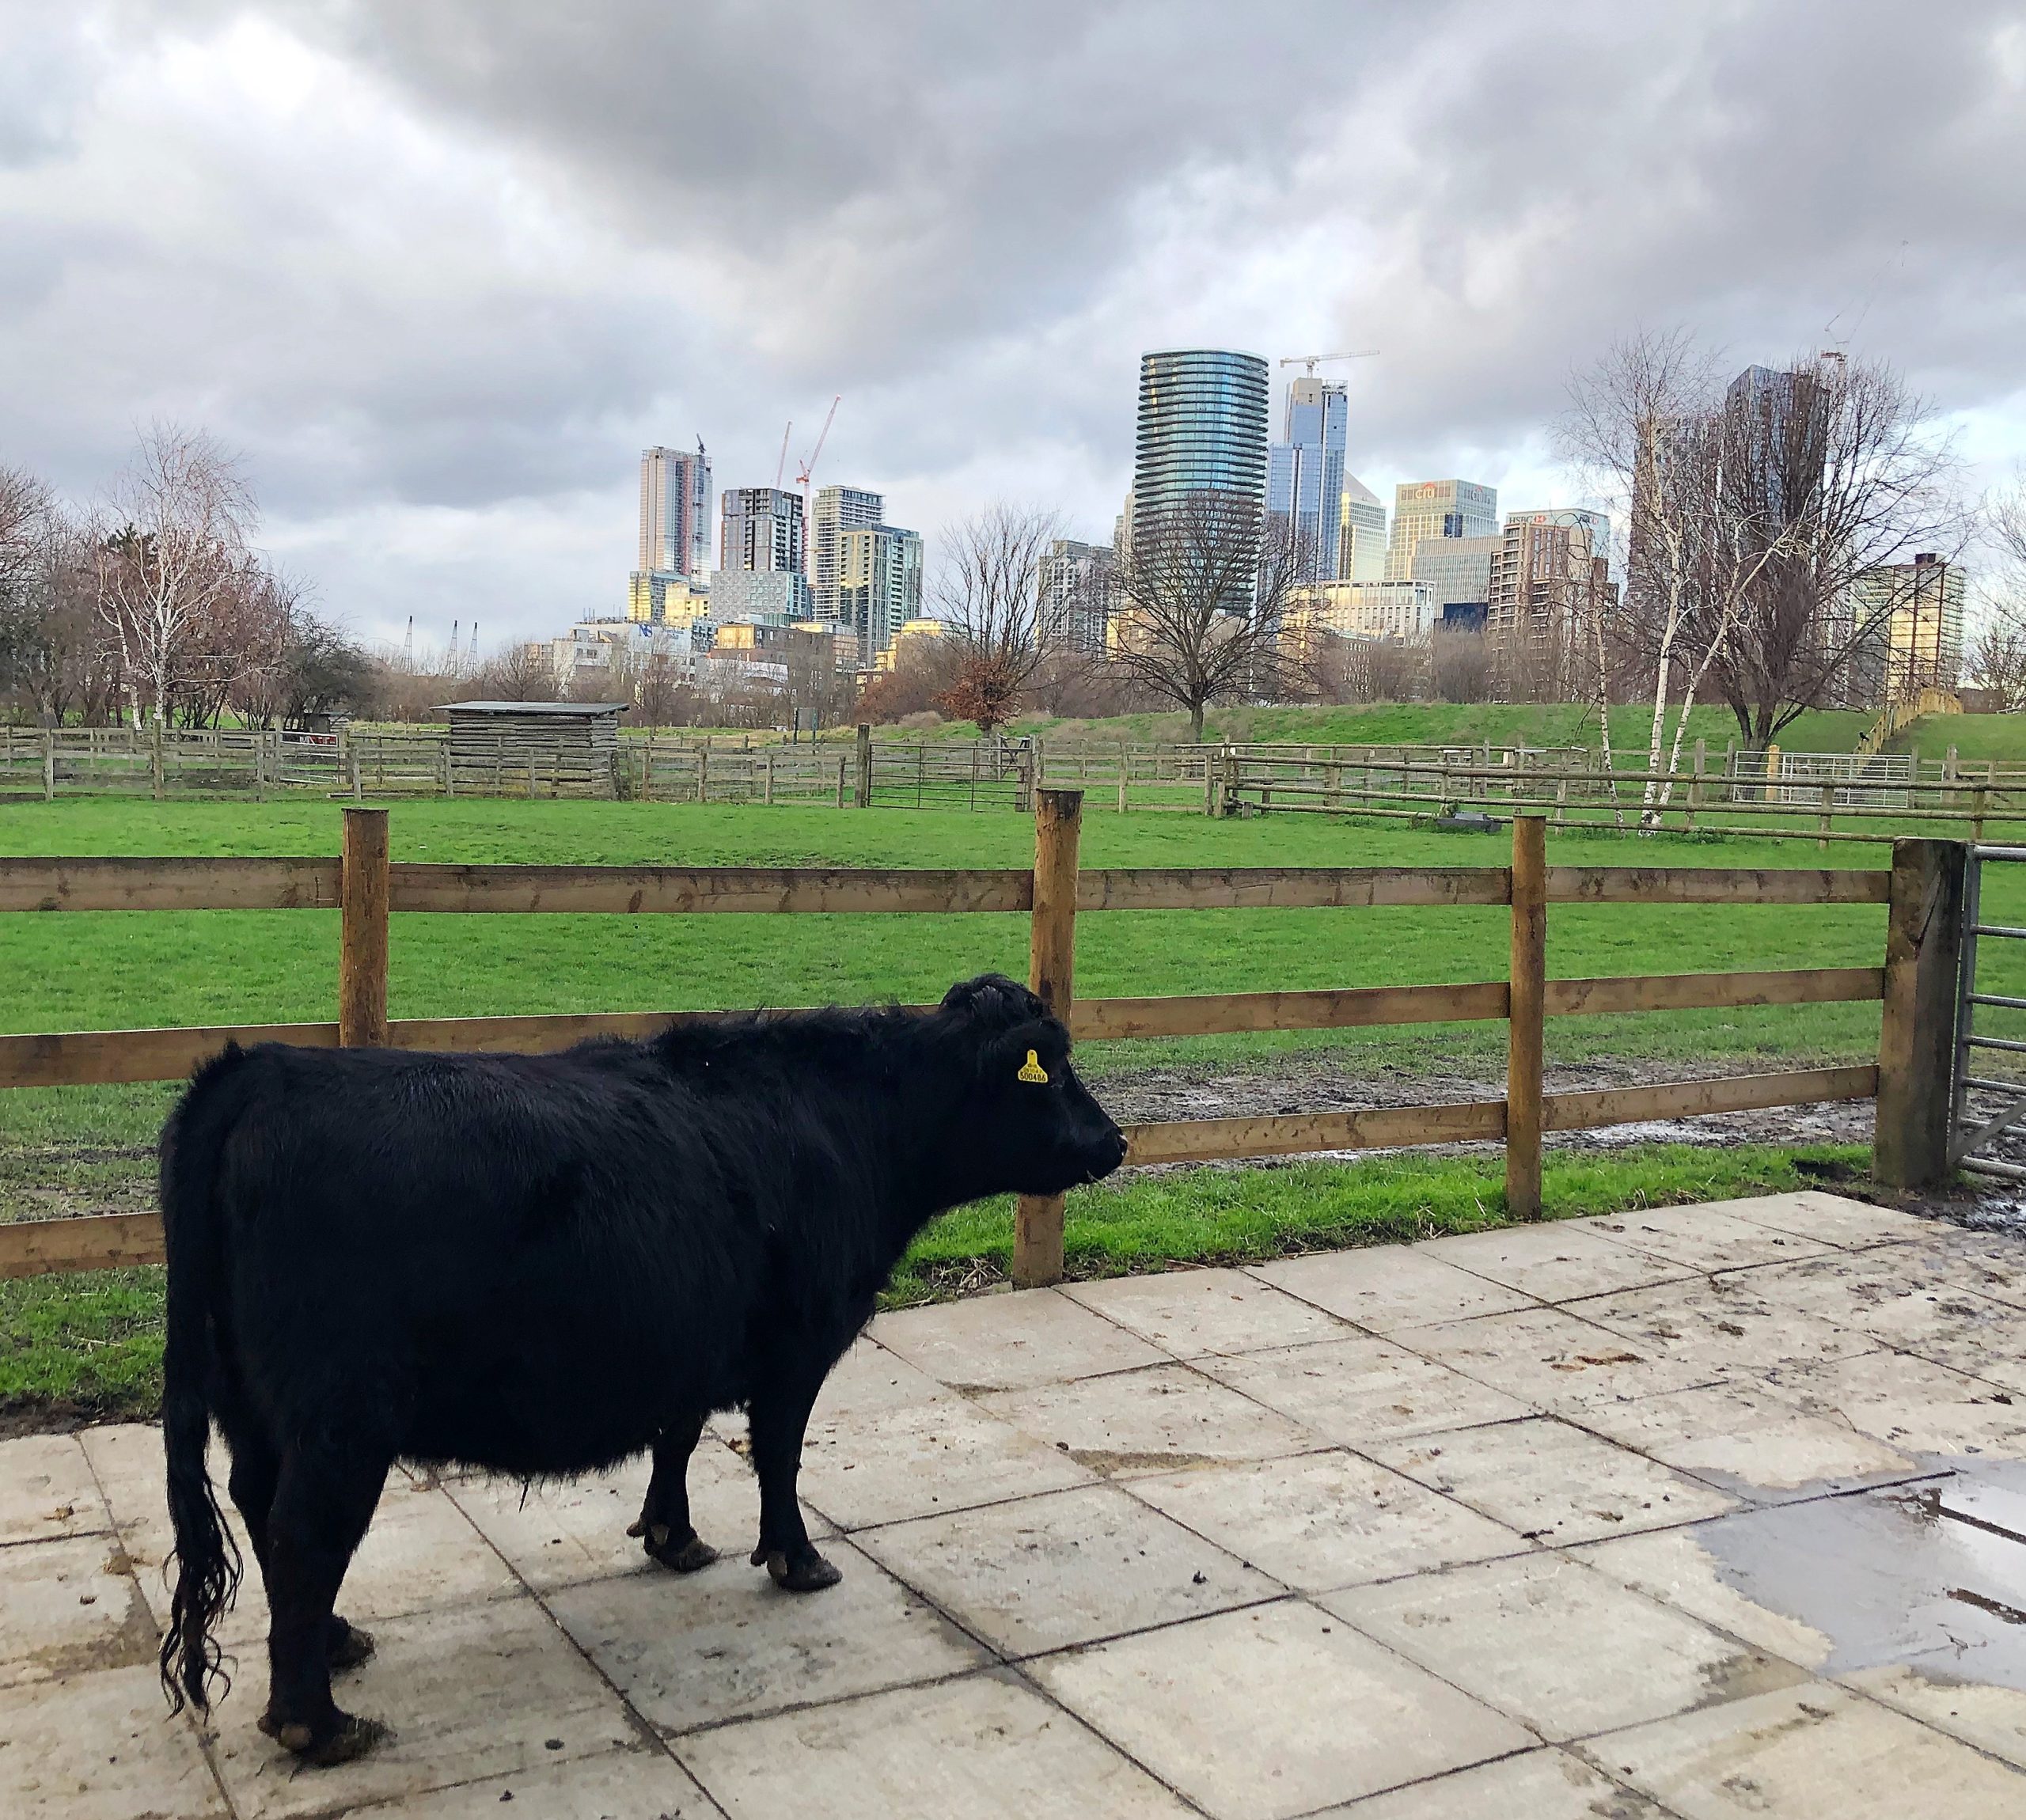 A cow standing at Mudchute Park and Farm in front of skyscrapers